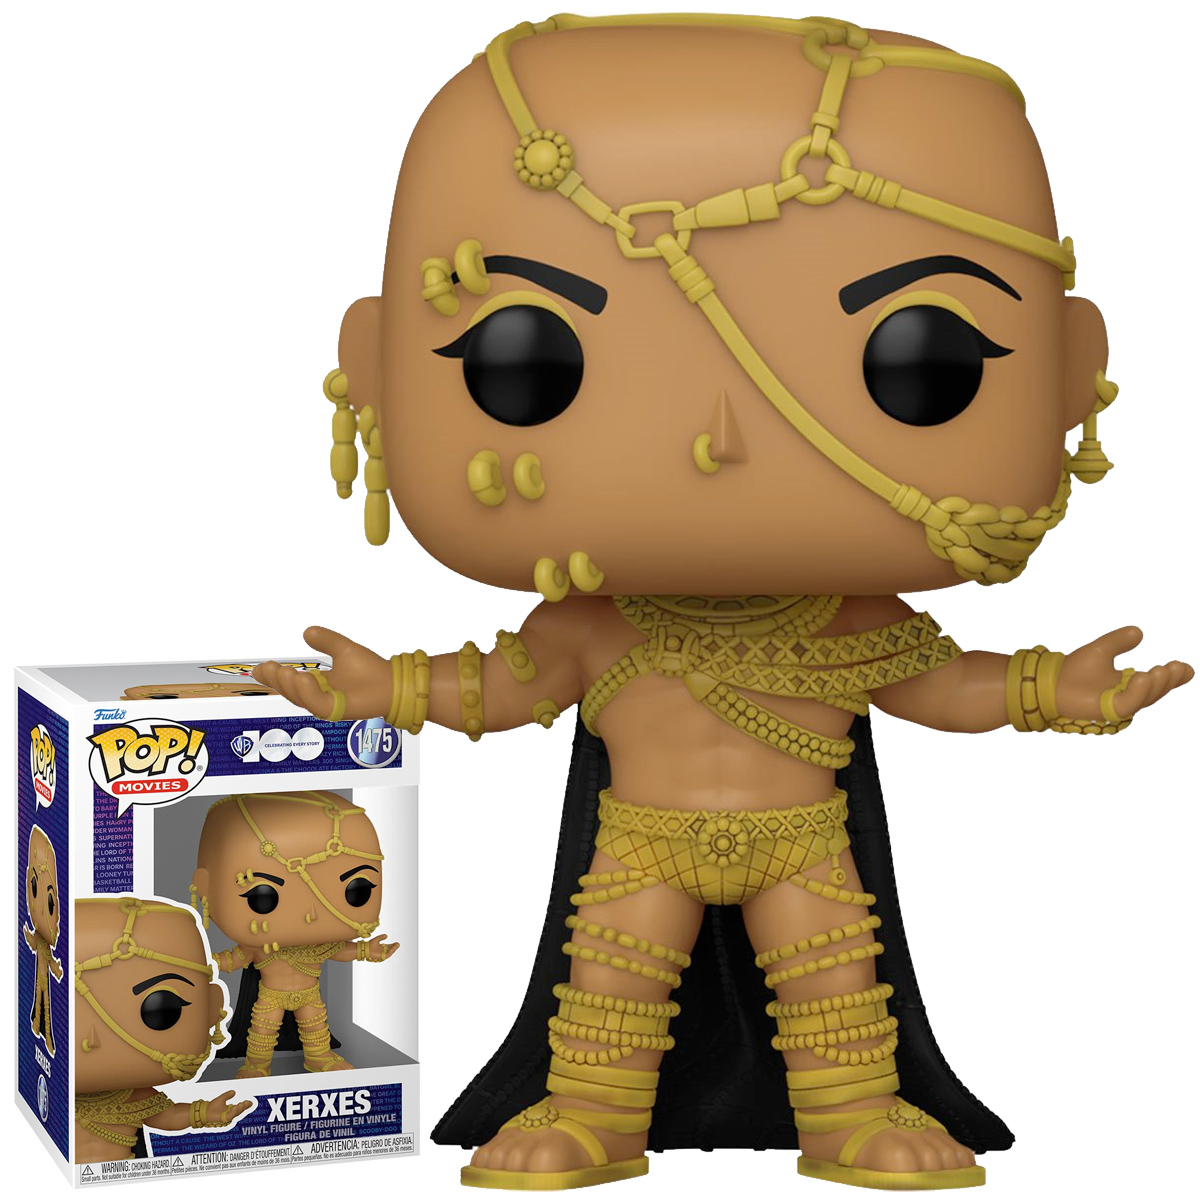 Pop dolls!  from the film 300 by Zack Snyder and Frank Miller